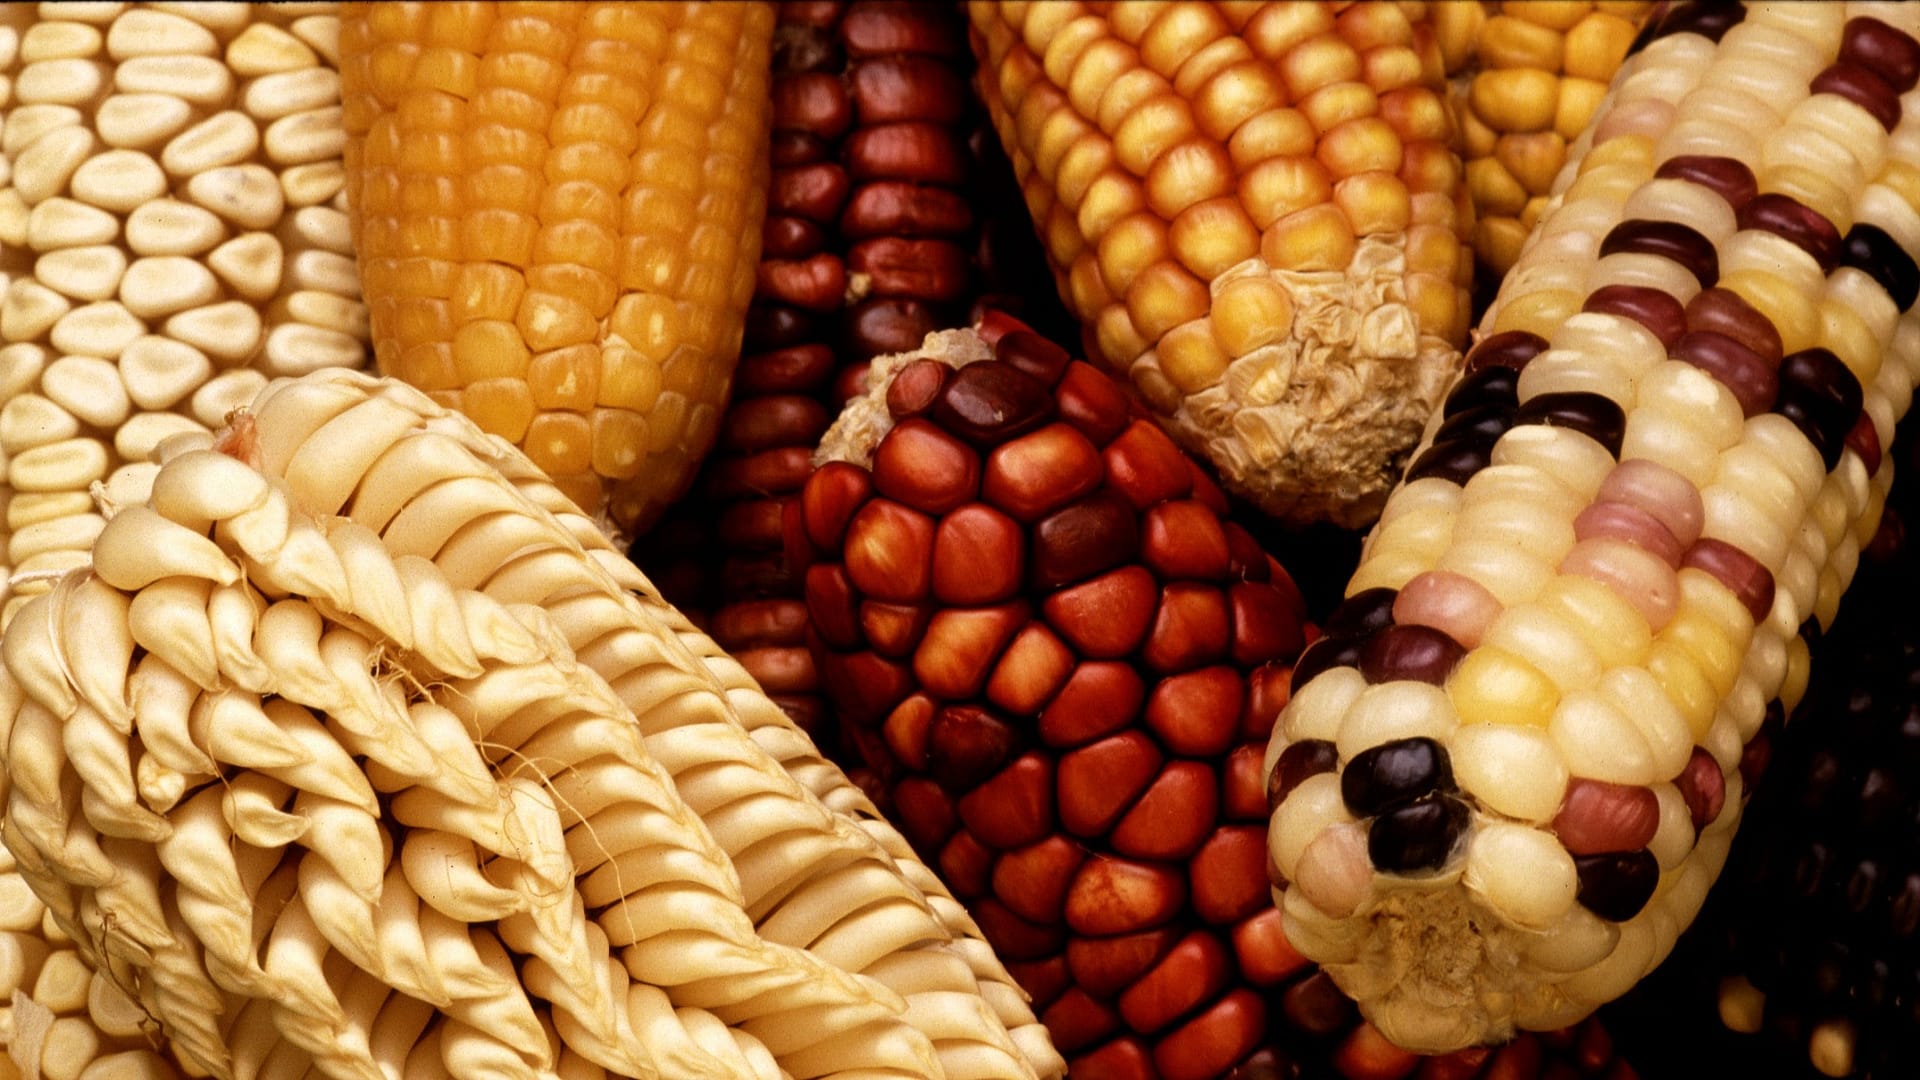 Image: different varieties and colors of corn